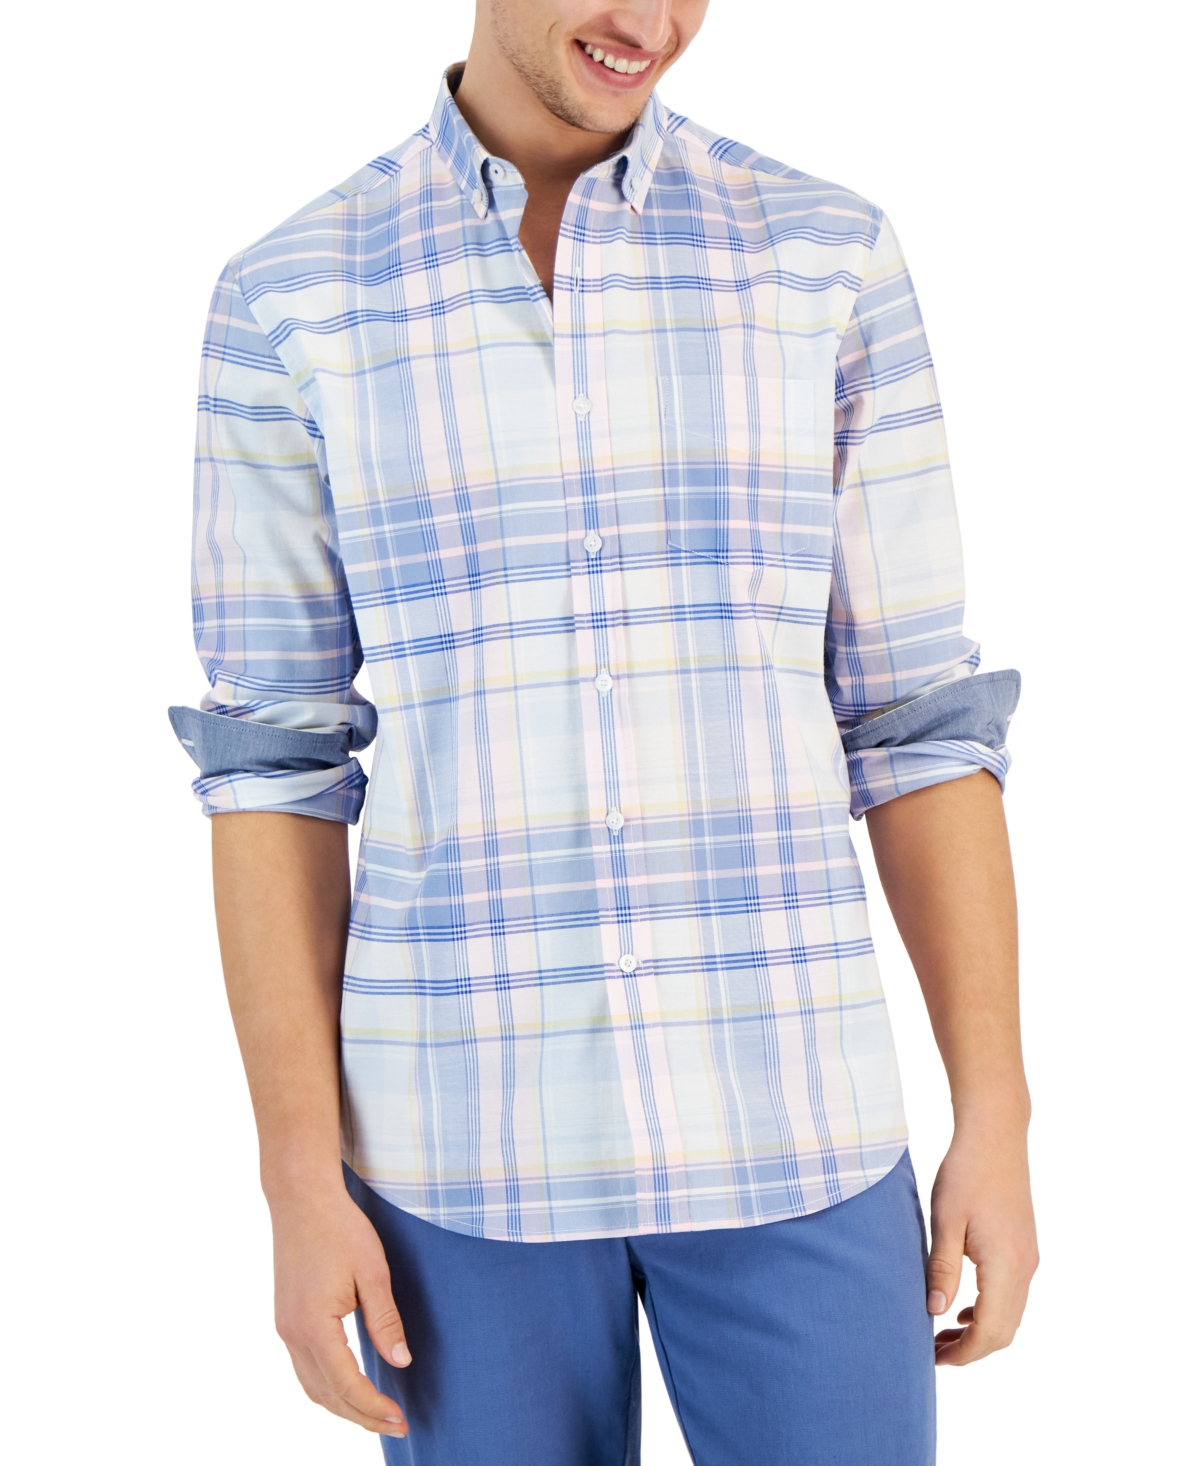 Men's Lima Plaid Long Sleeve Button-Down Oxford Shirt, Created for Macy's - Bright White